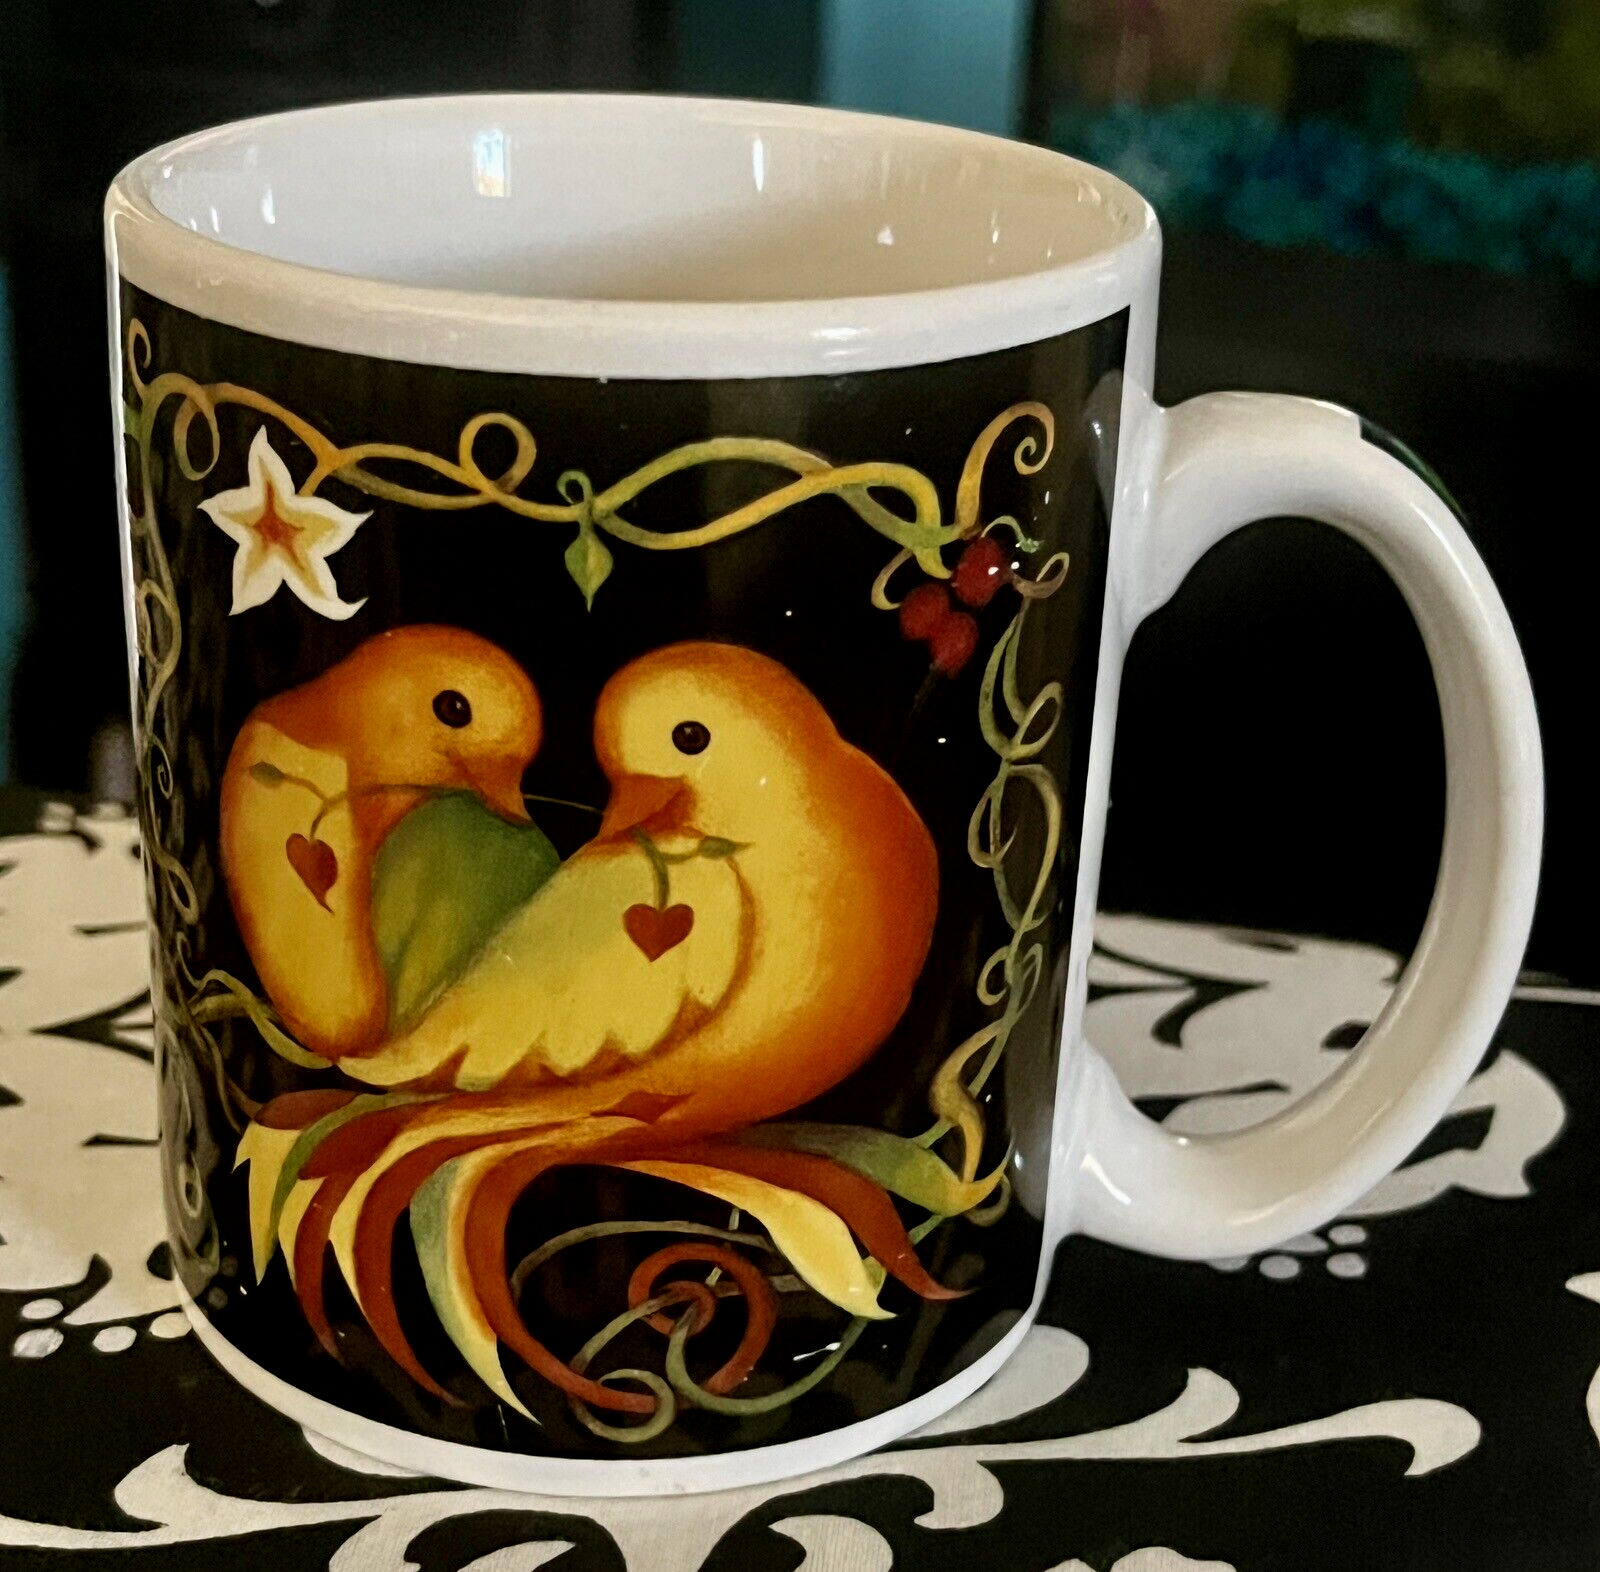 Vintage Buon Giorno Coffee Mug  Doves In Love Holds 12 Ounces